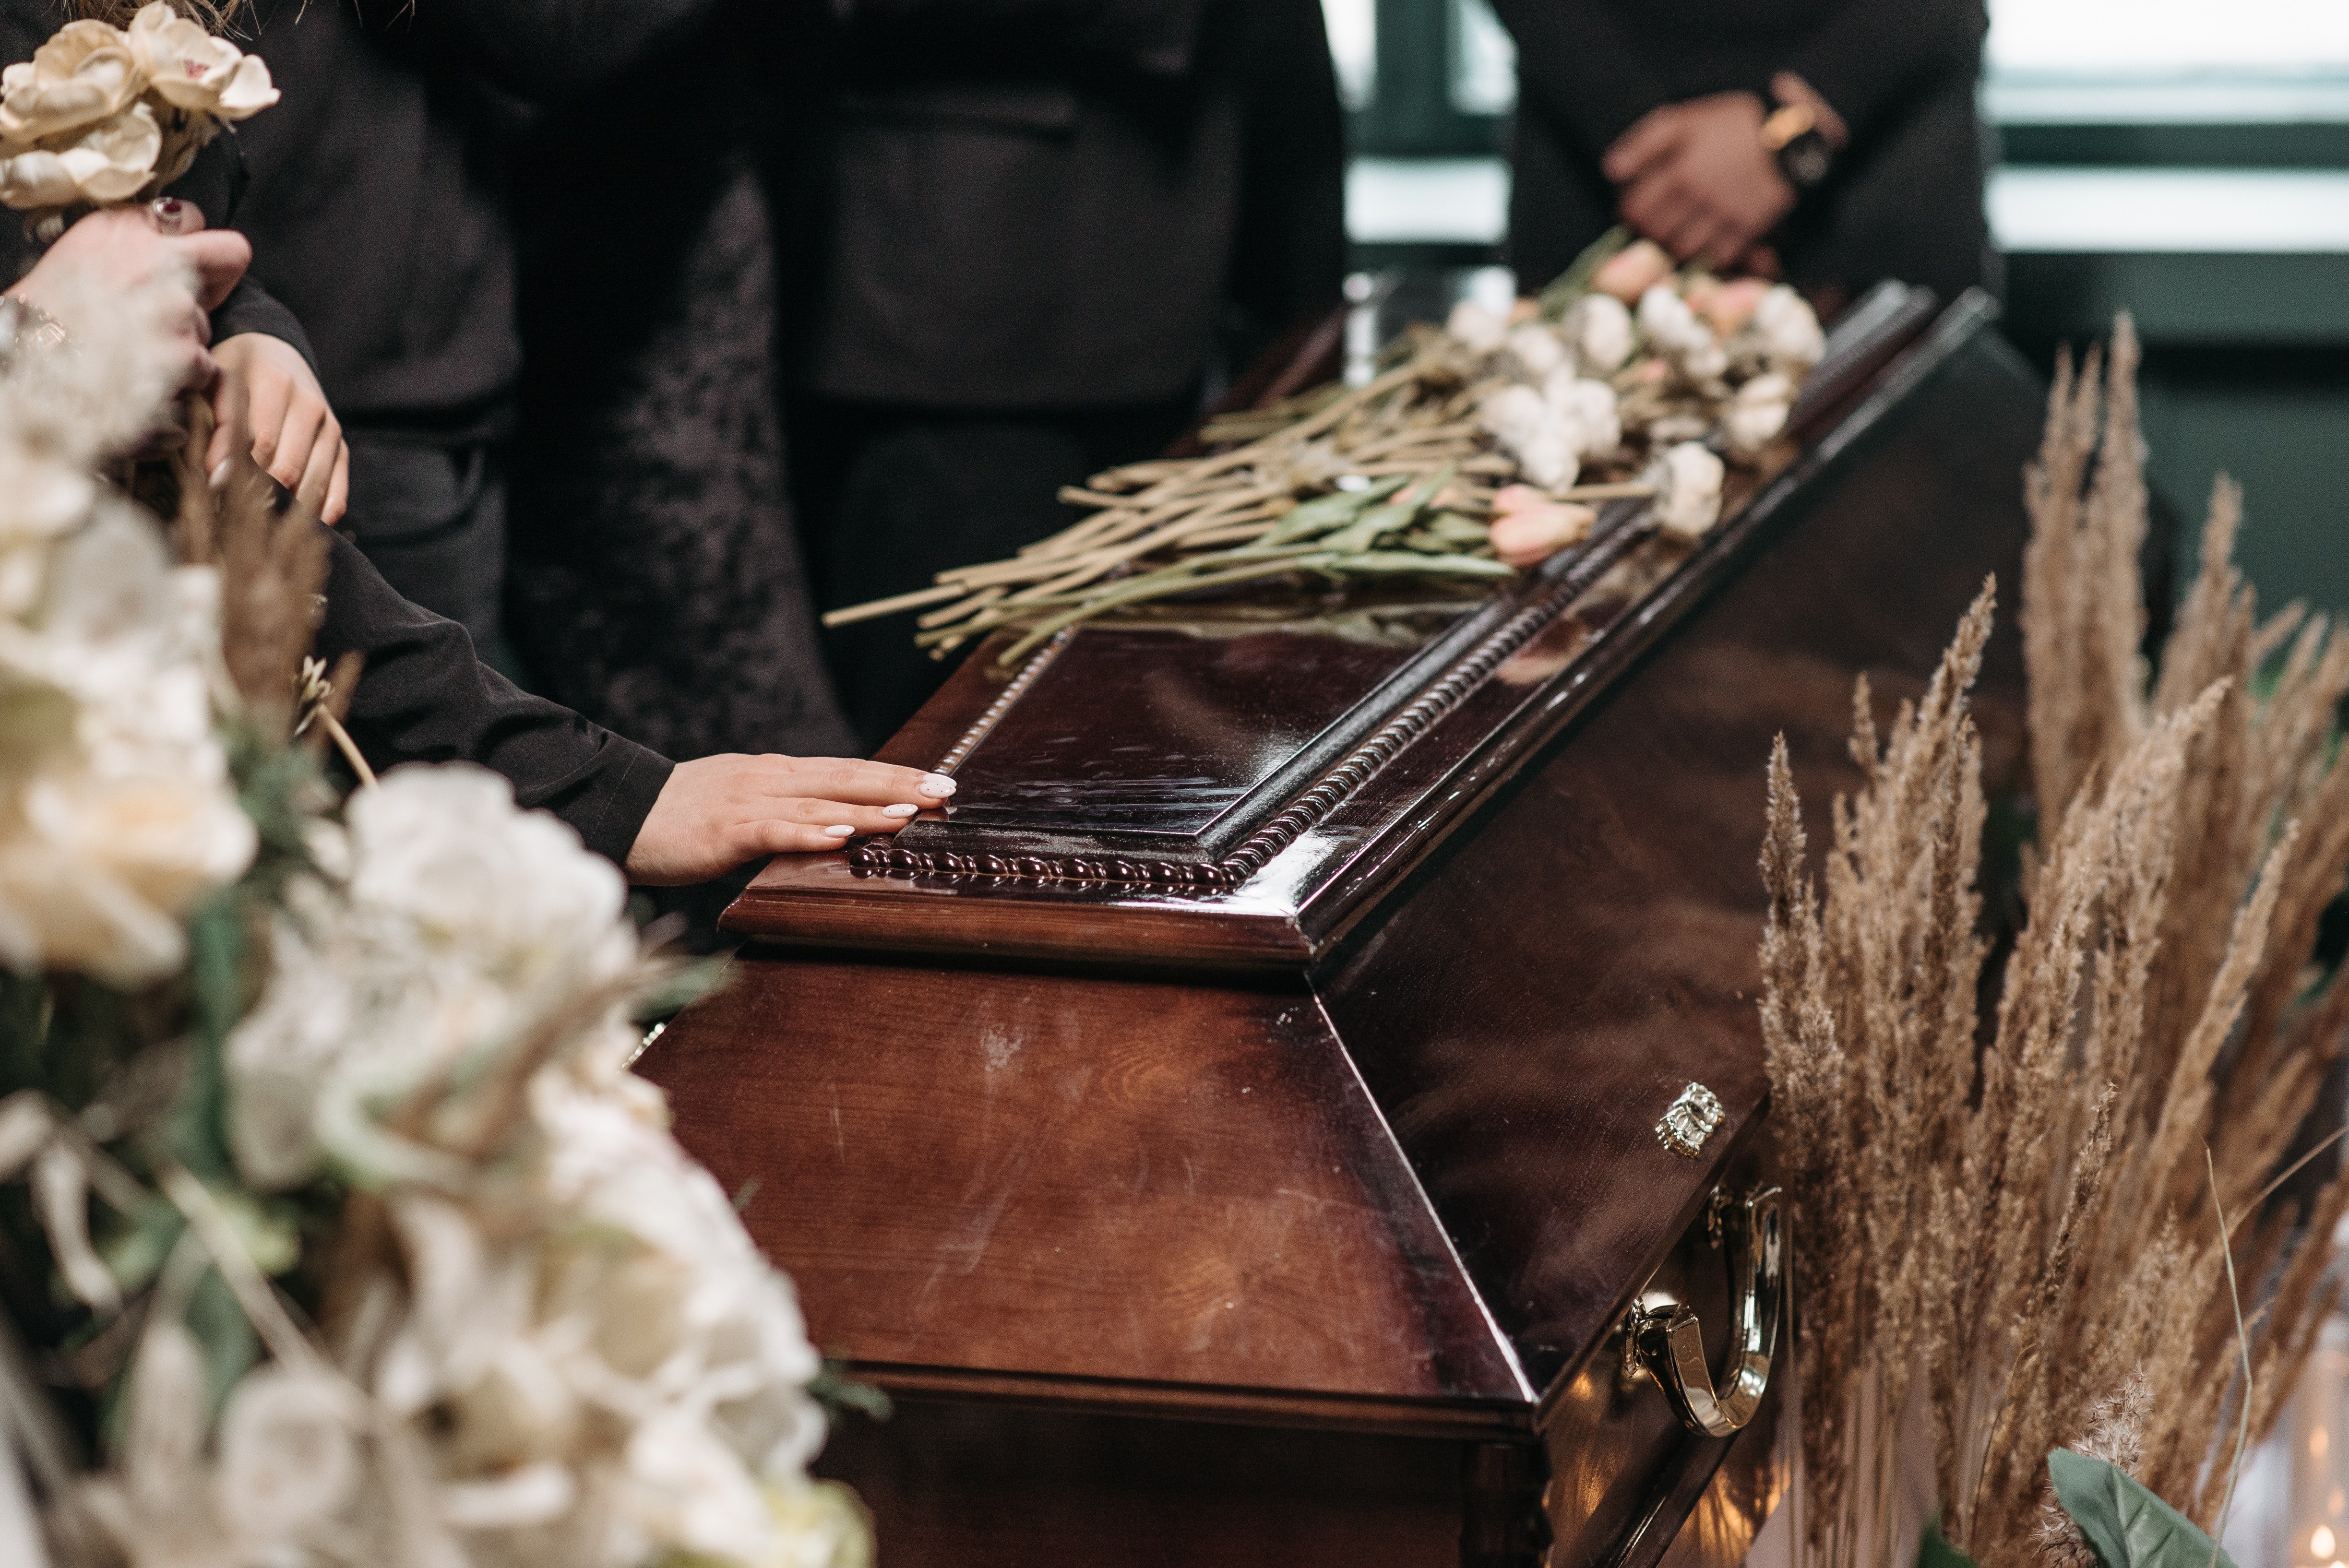 Lily's grandmother had passed away. | Source: Pexels